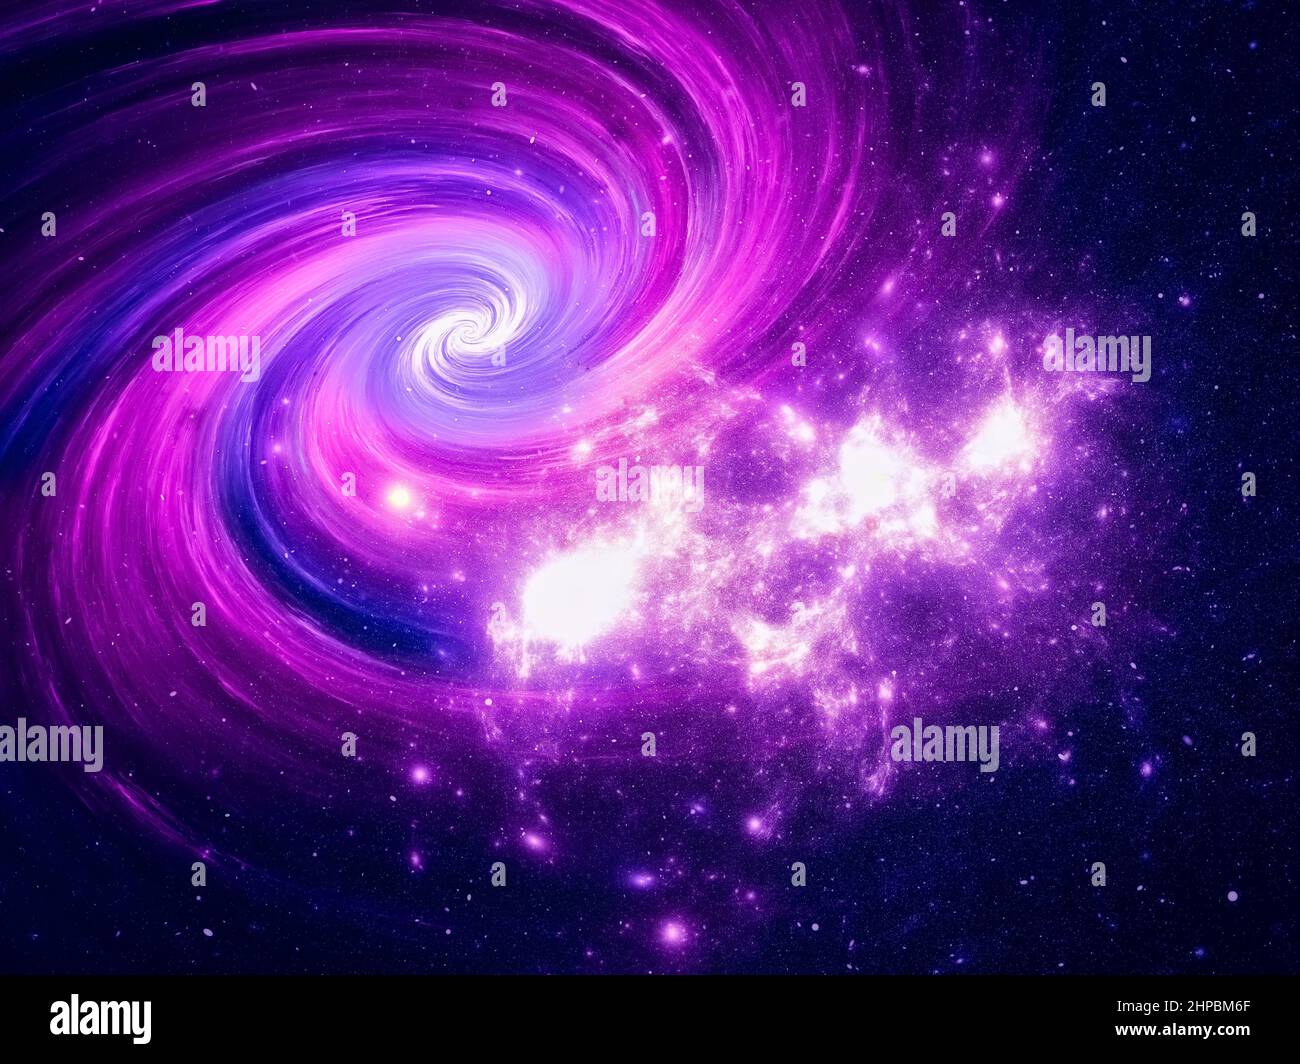 Spiral galaxy and star clusters - abstract 3d illustration - space theme Stock Photo